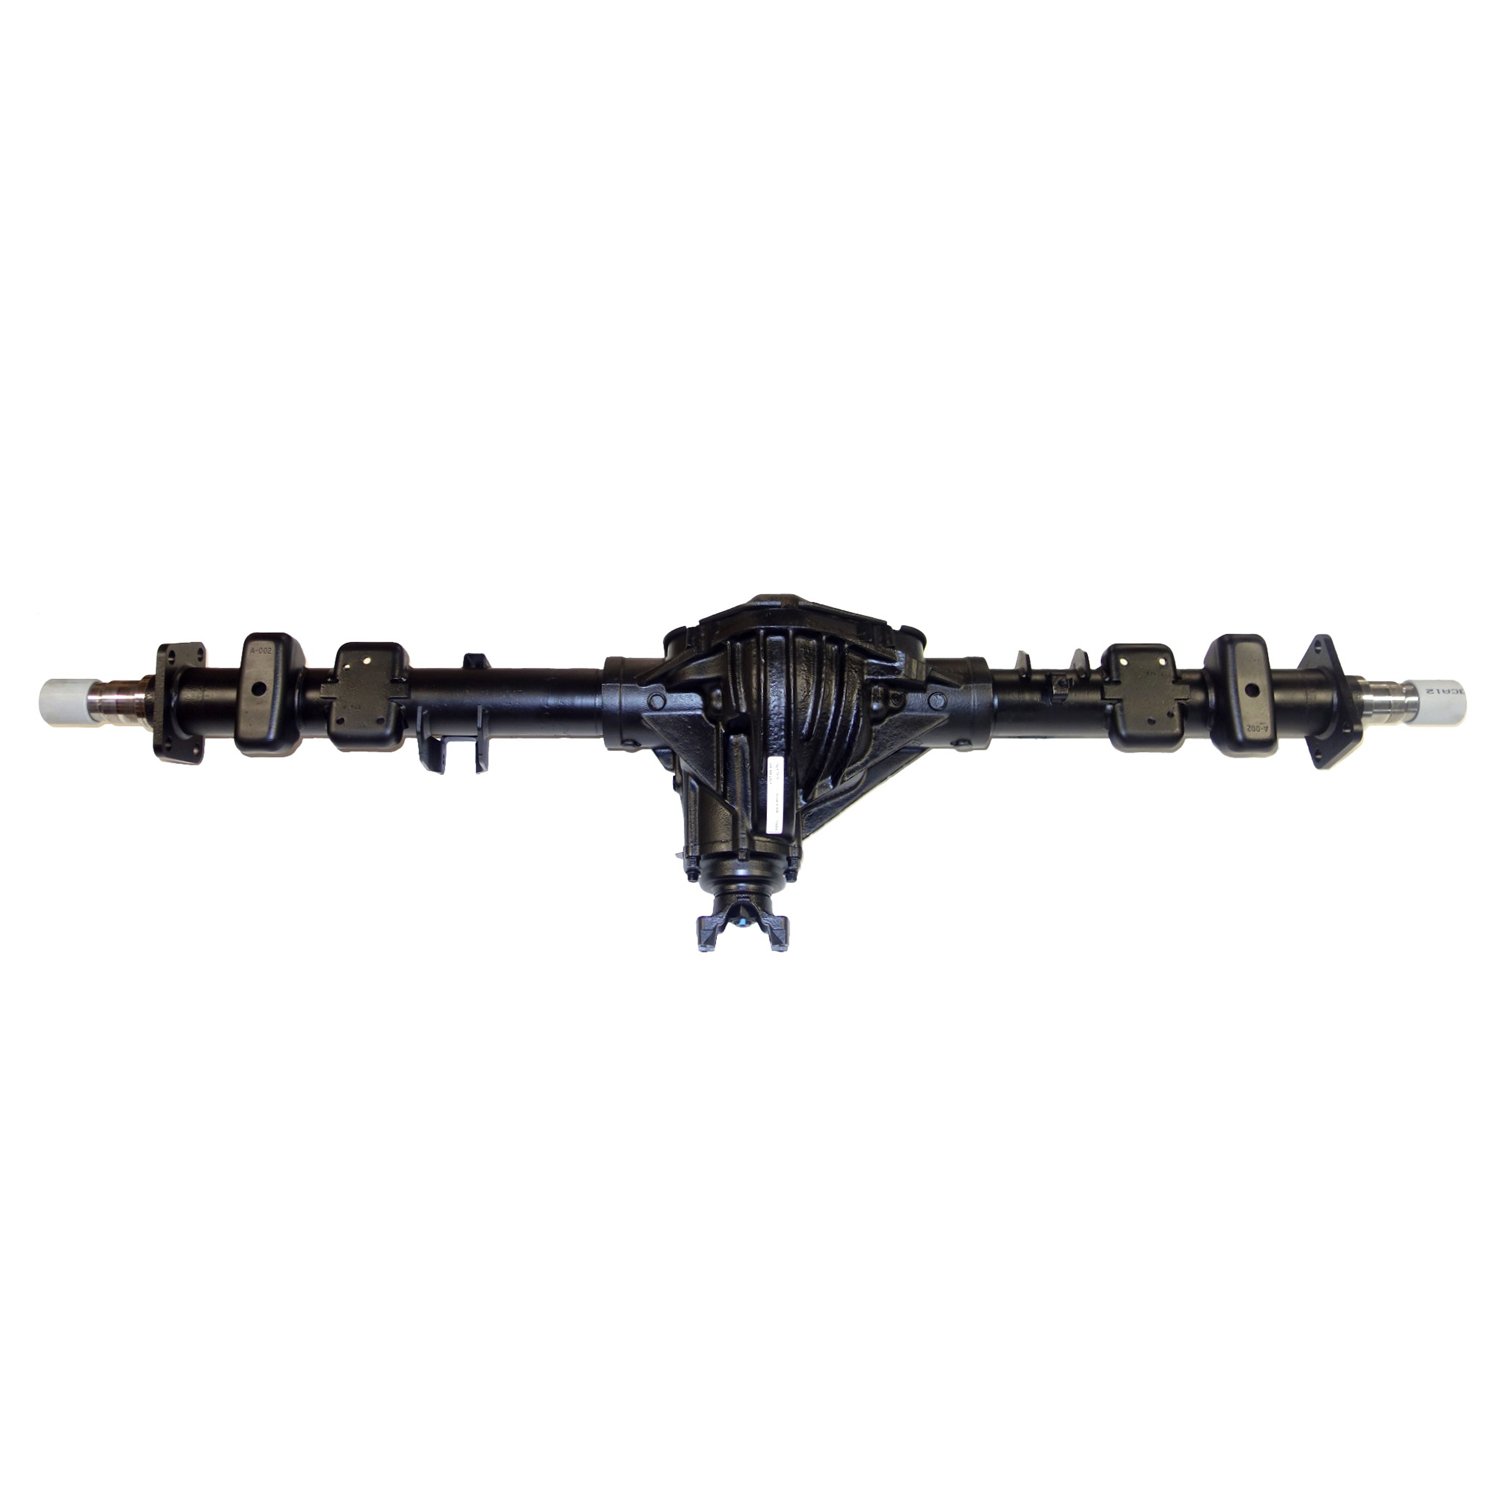 Remanufactured Axle Assy GM 14 Bolt Truck 90-00 GM 3500, 3.42 , DRW, Posi LSD, Wide Track